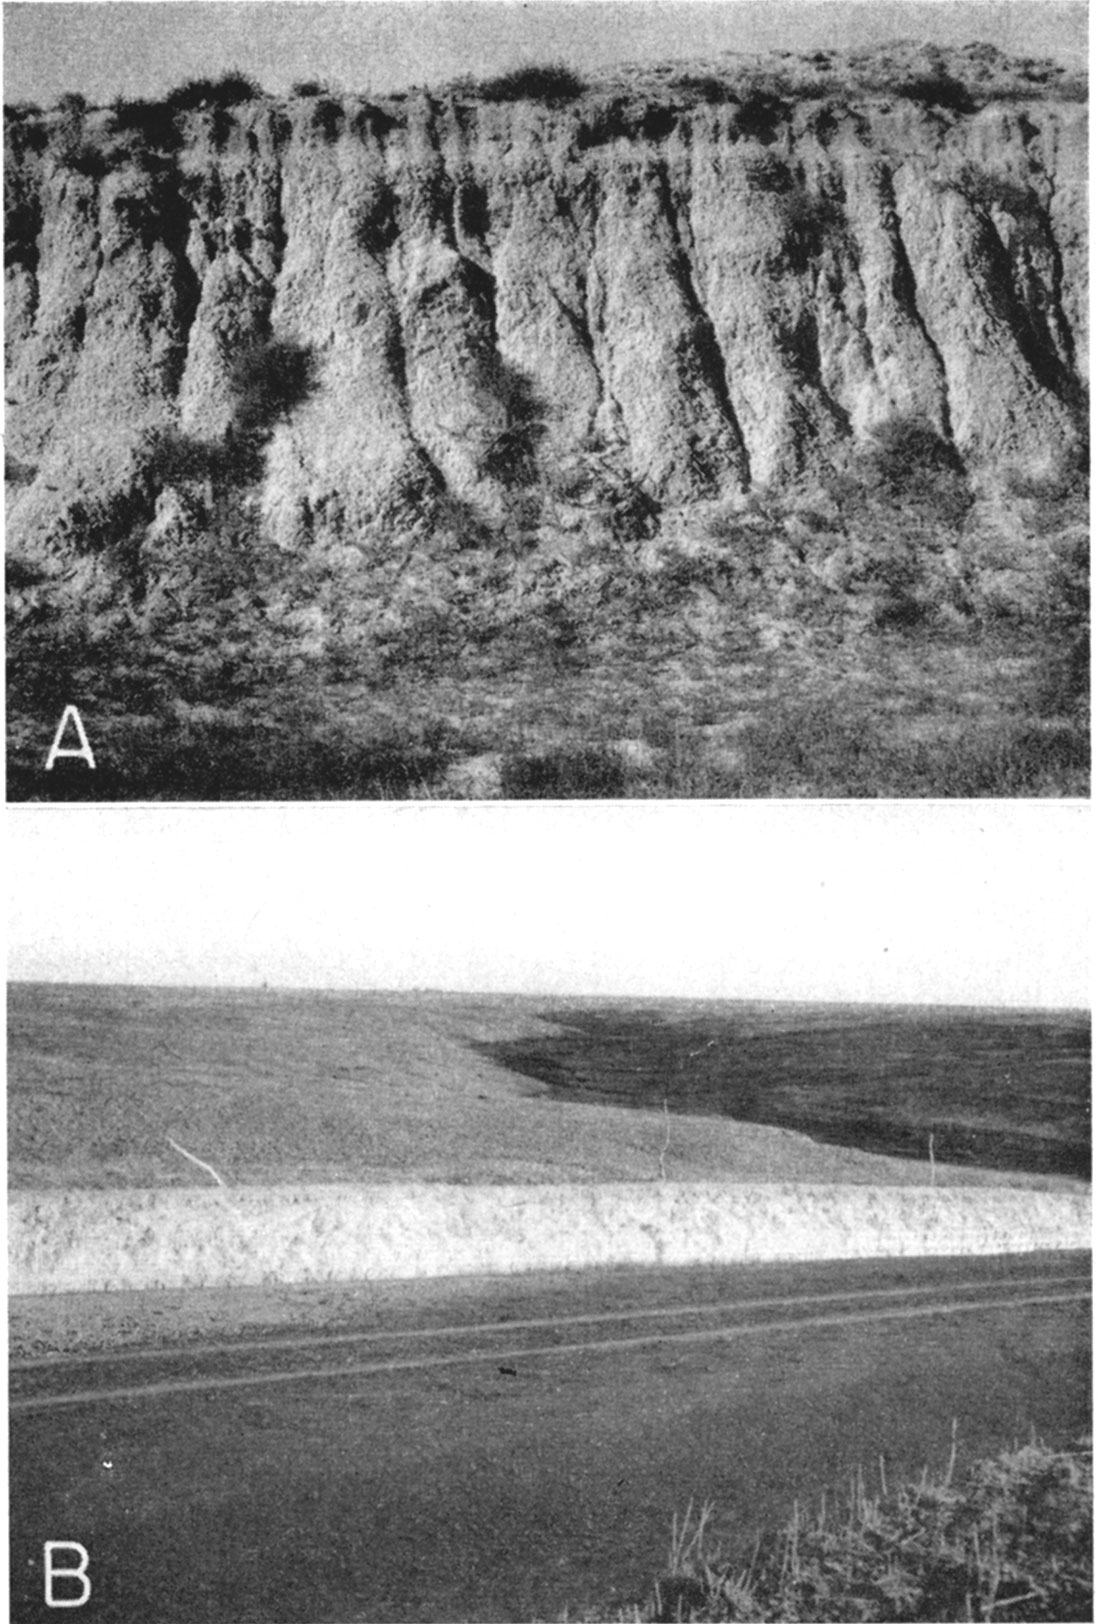 two black and white photos; highly eroded loess in 112-foot outcrop; lower photo is fresher outcrop